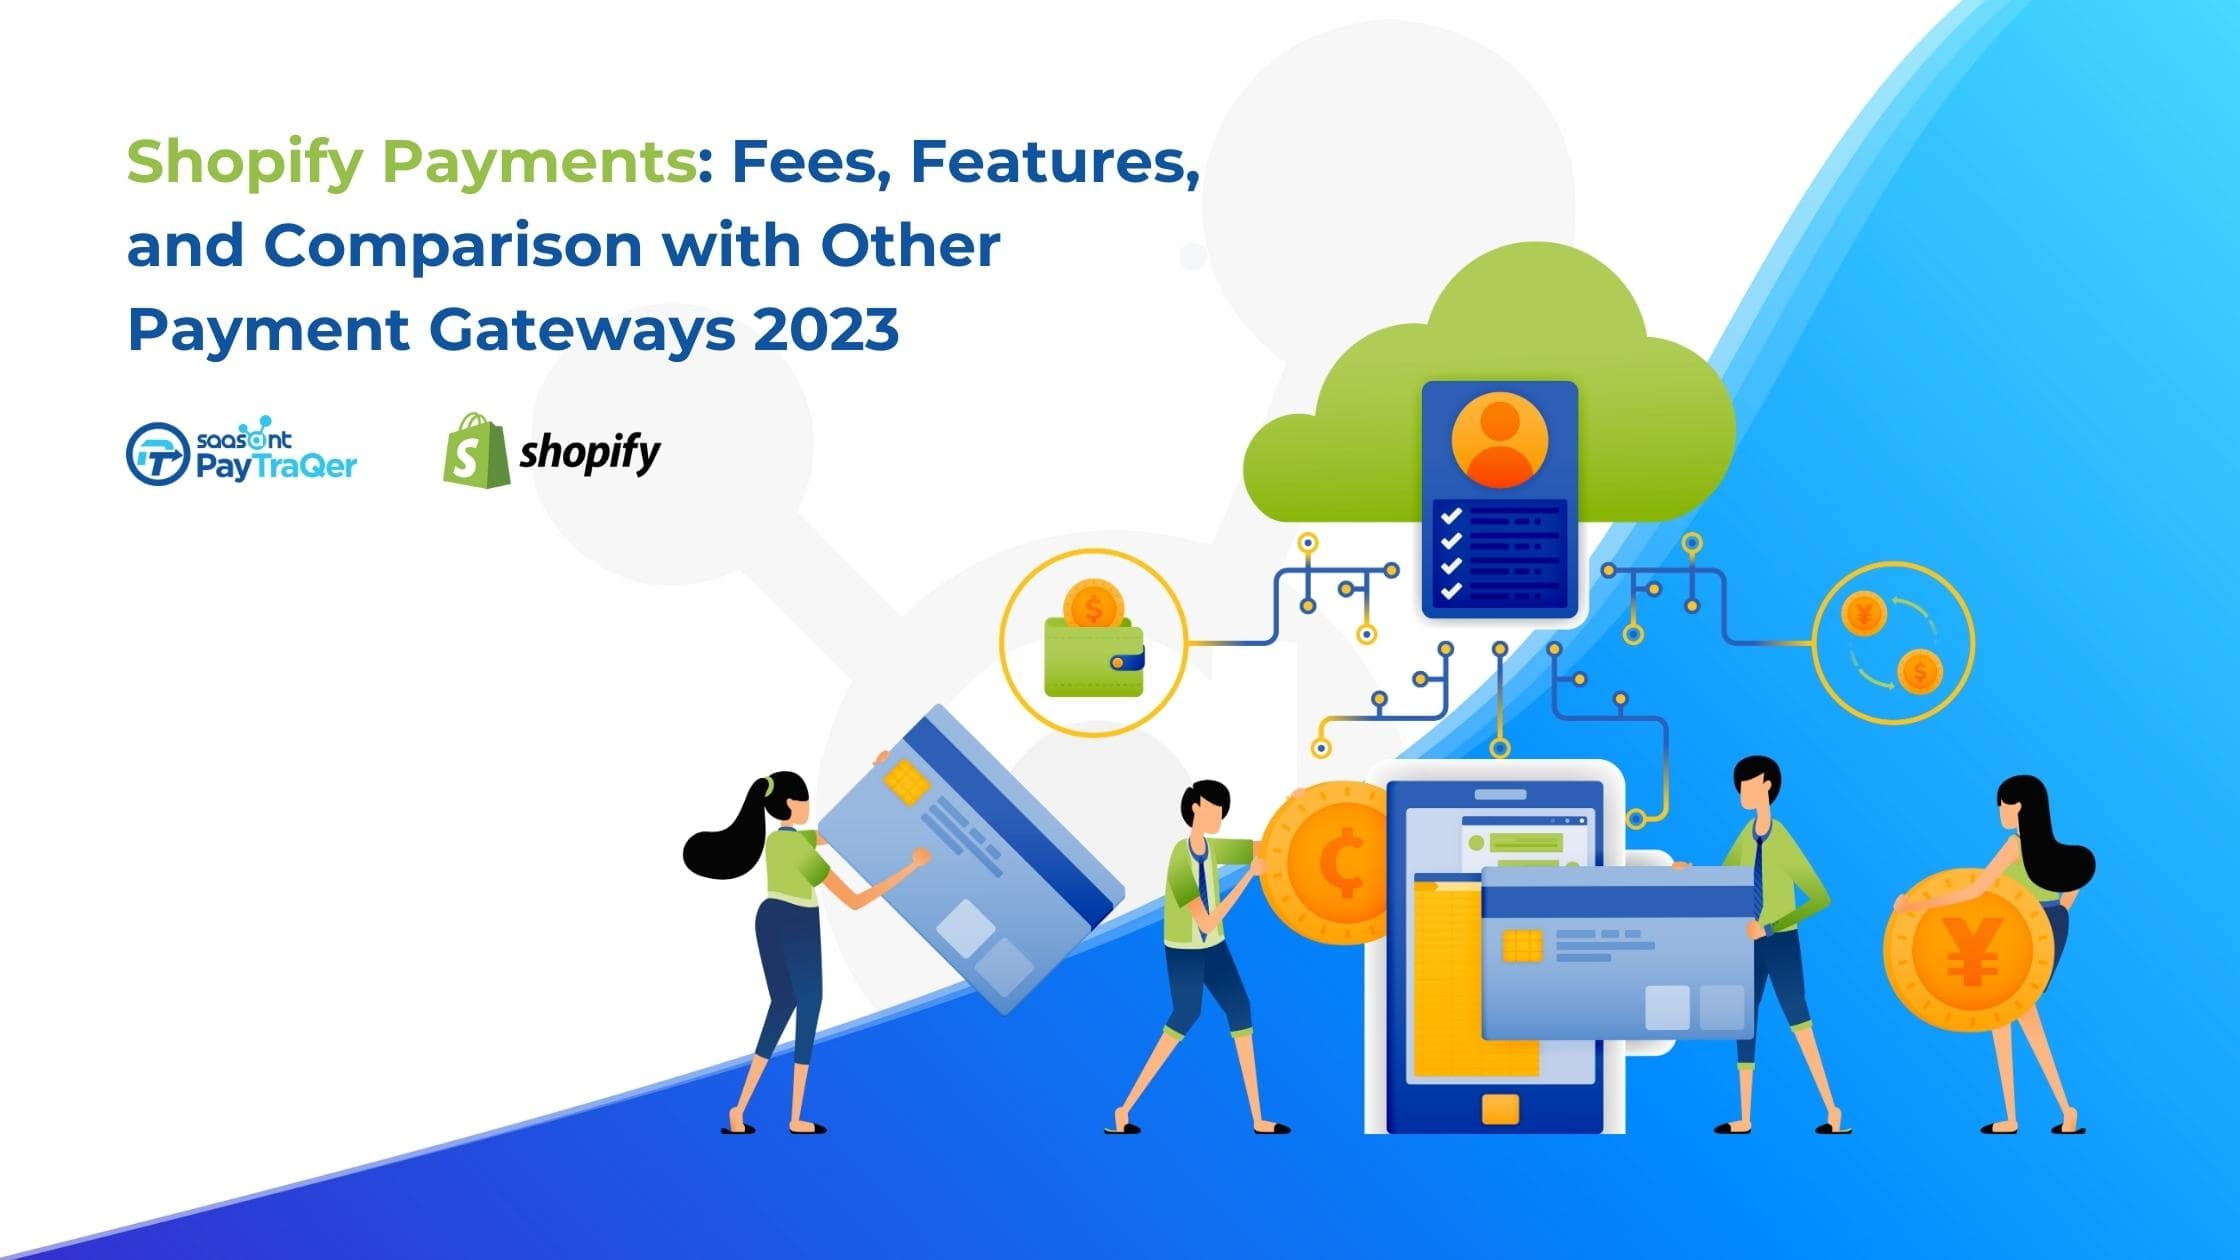 What are Shopify Payments